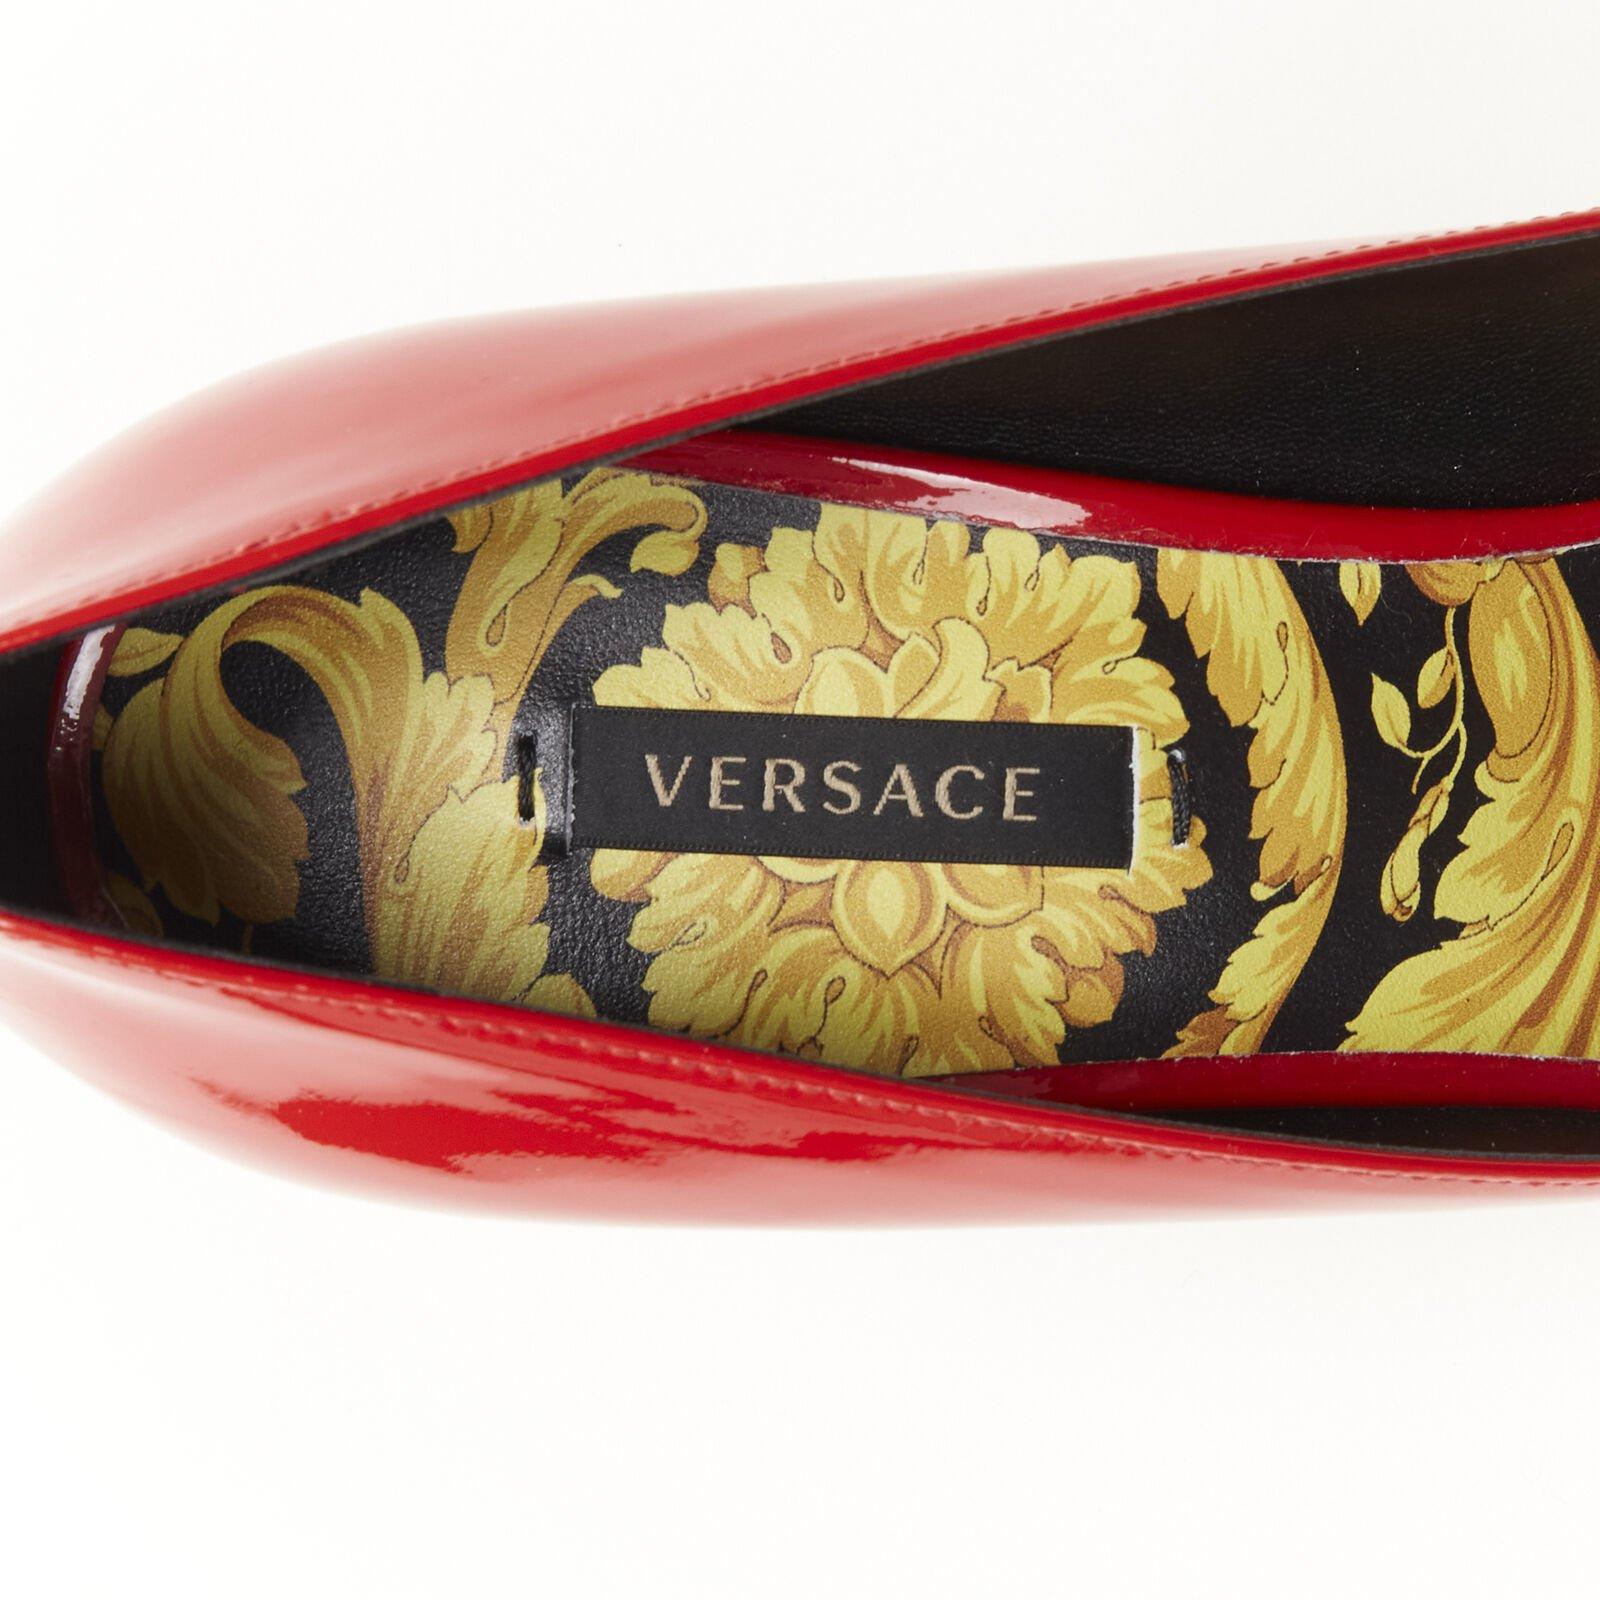 VERSACE Hibiscus Barocco gold sole red patent Medusa stud pump EU37.5 US7.5 For Sale 6